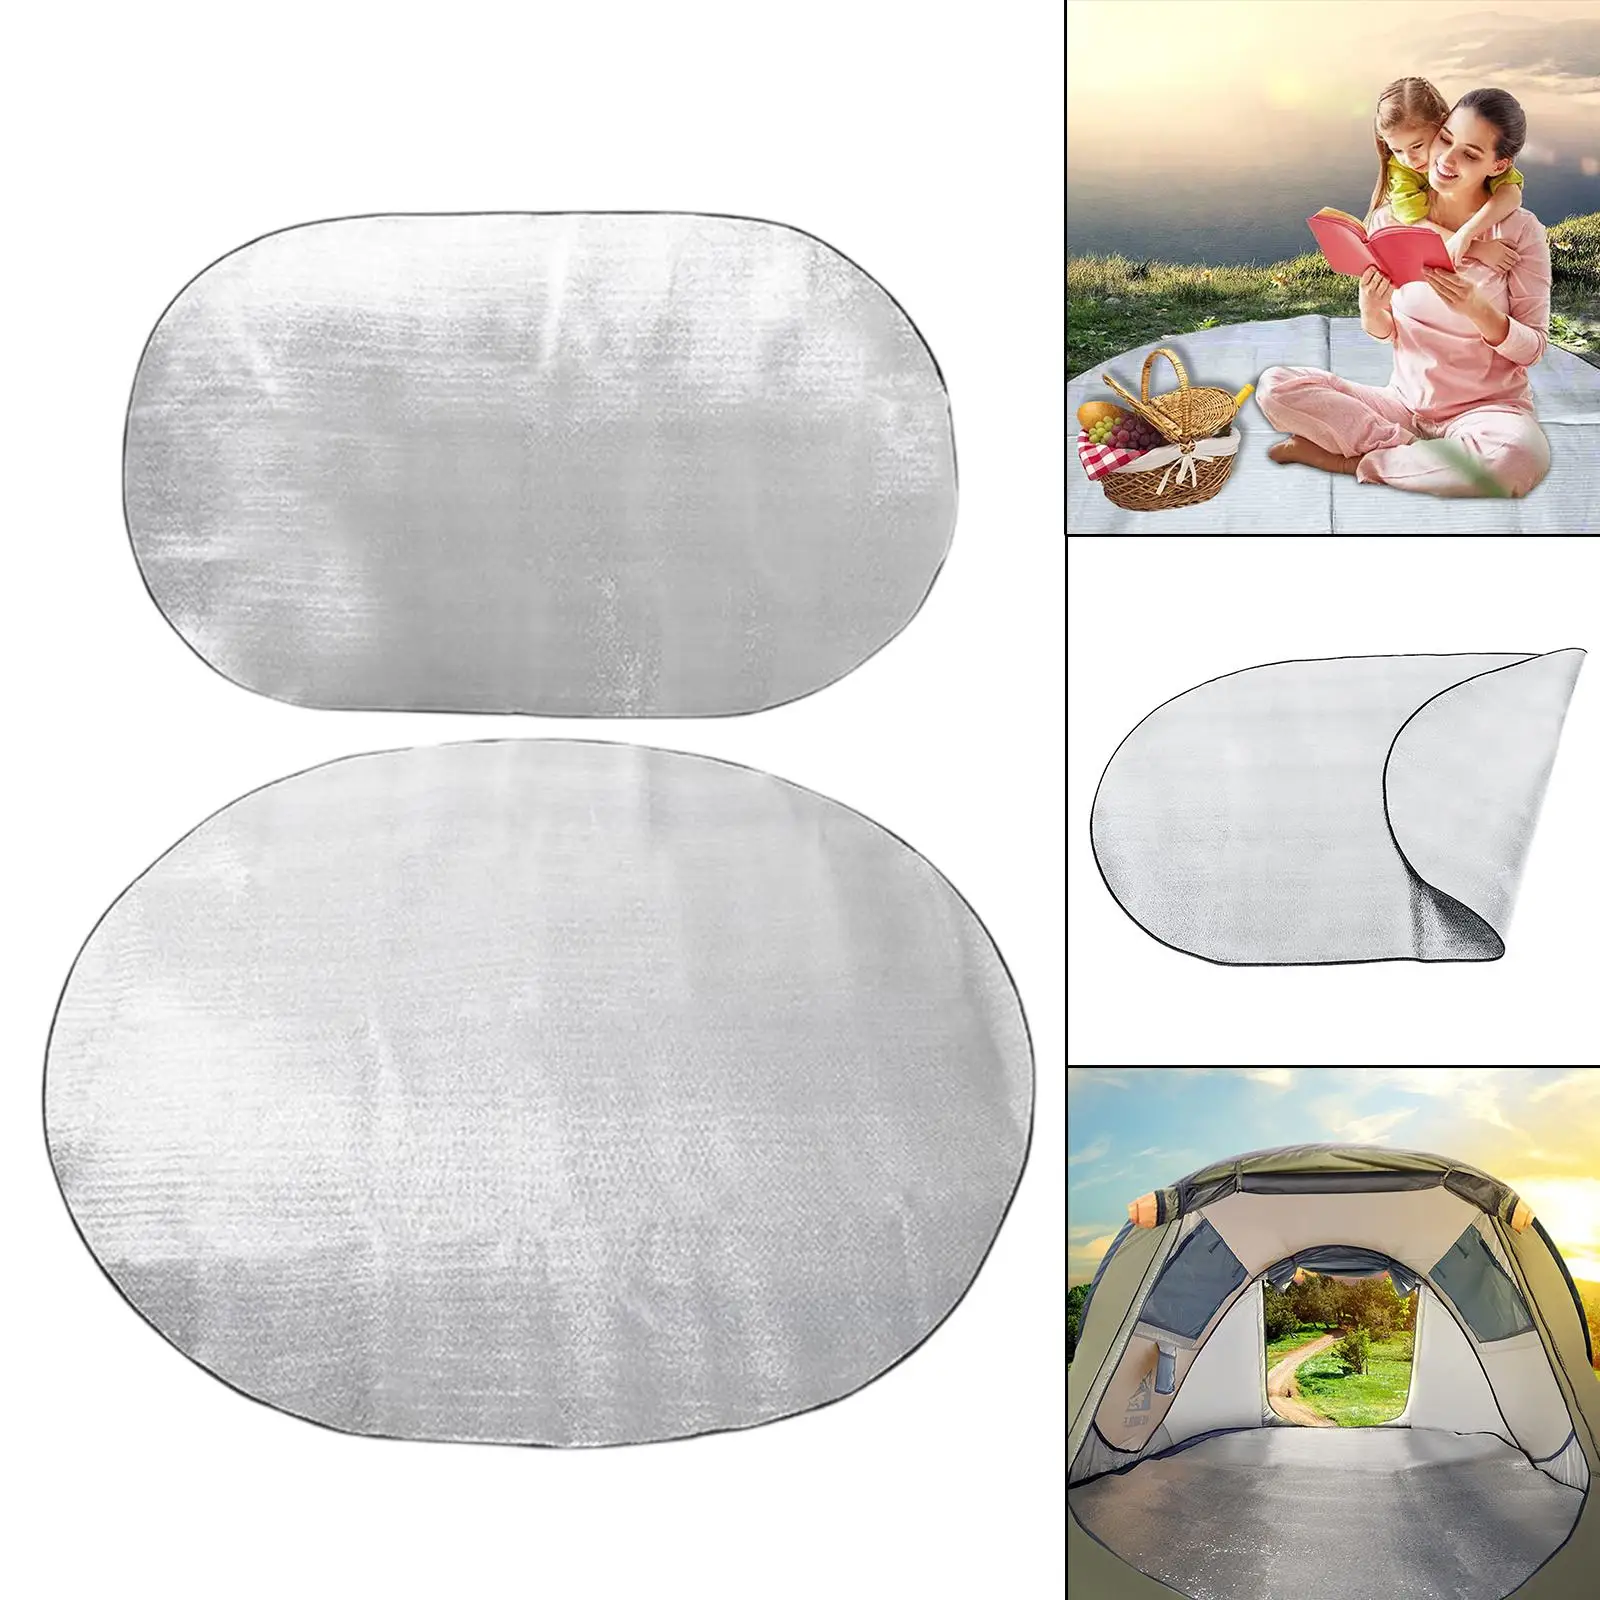 Camping Mat Sleeping Pad Moistureproof Portable Blanket for Tent Hiking Yoga Lawn